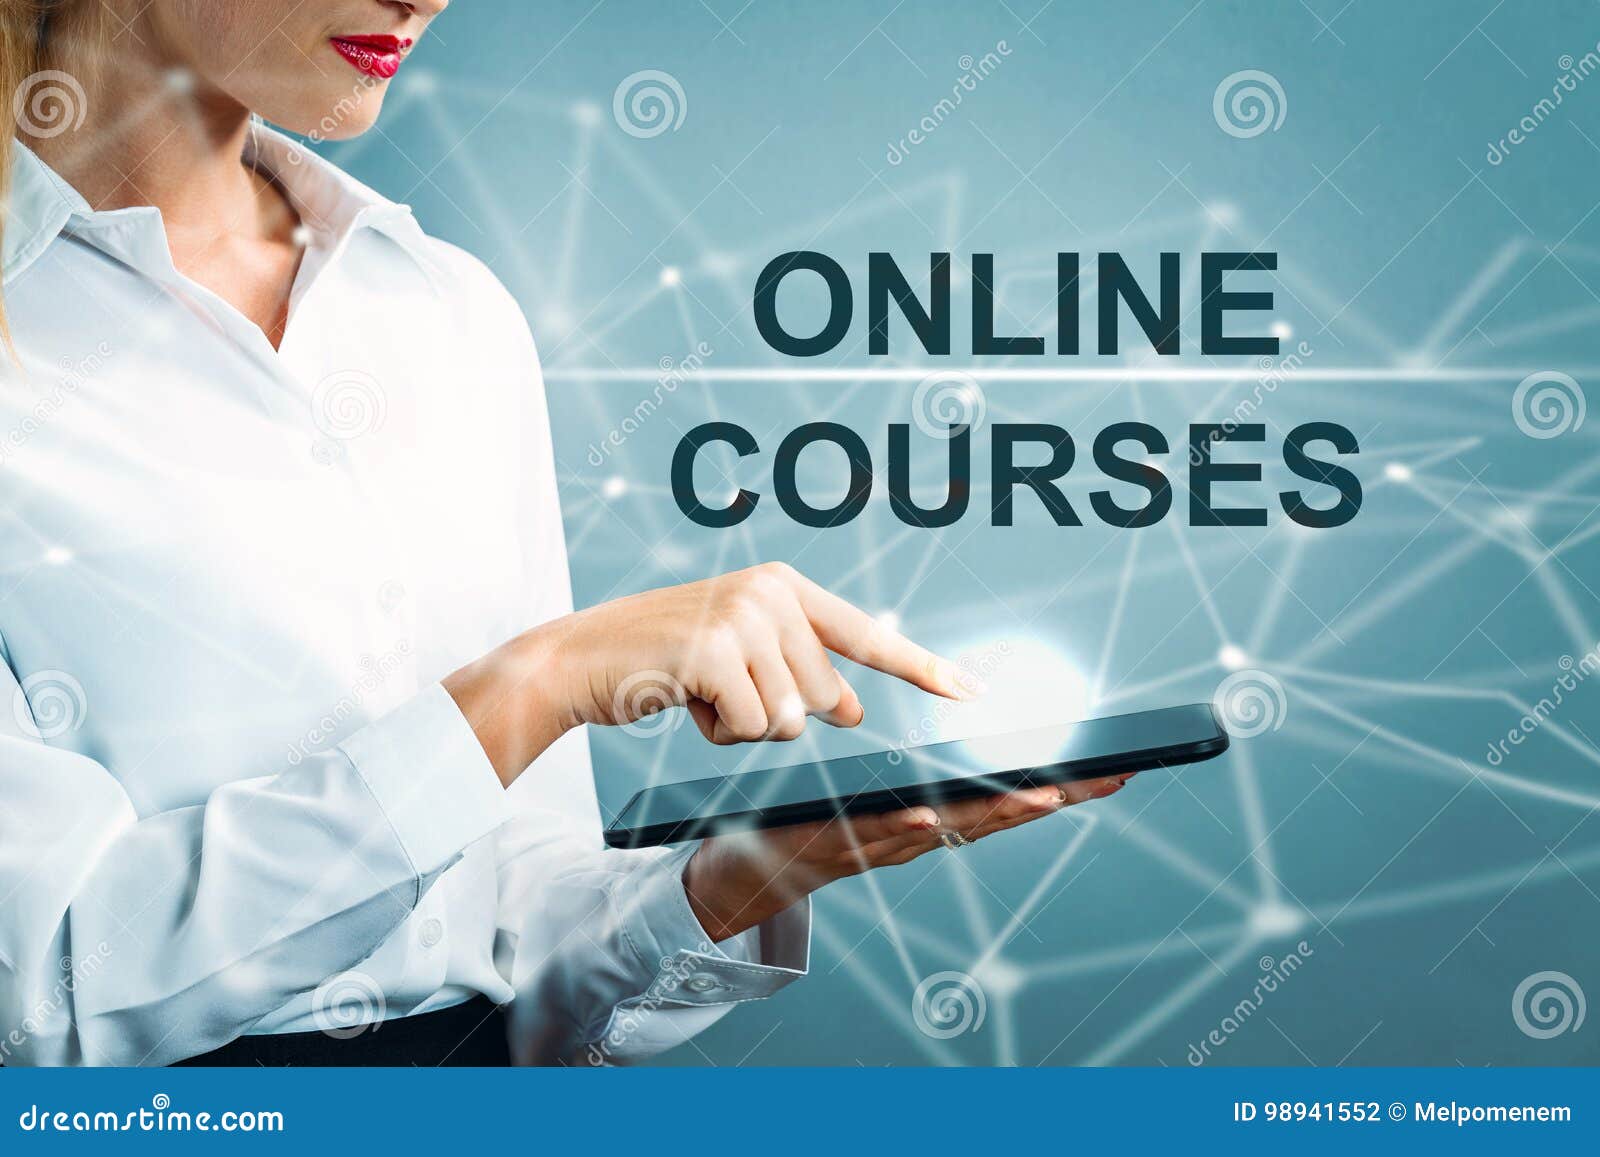 online courses text with business woman